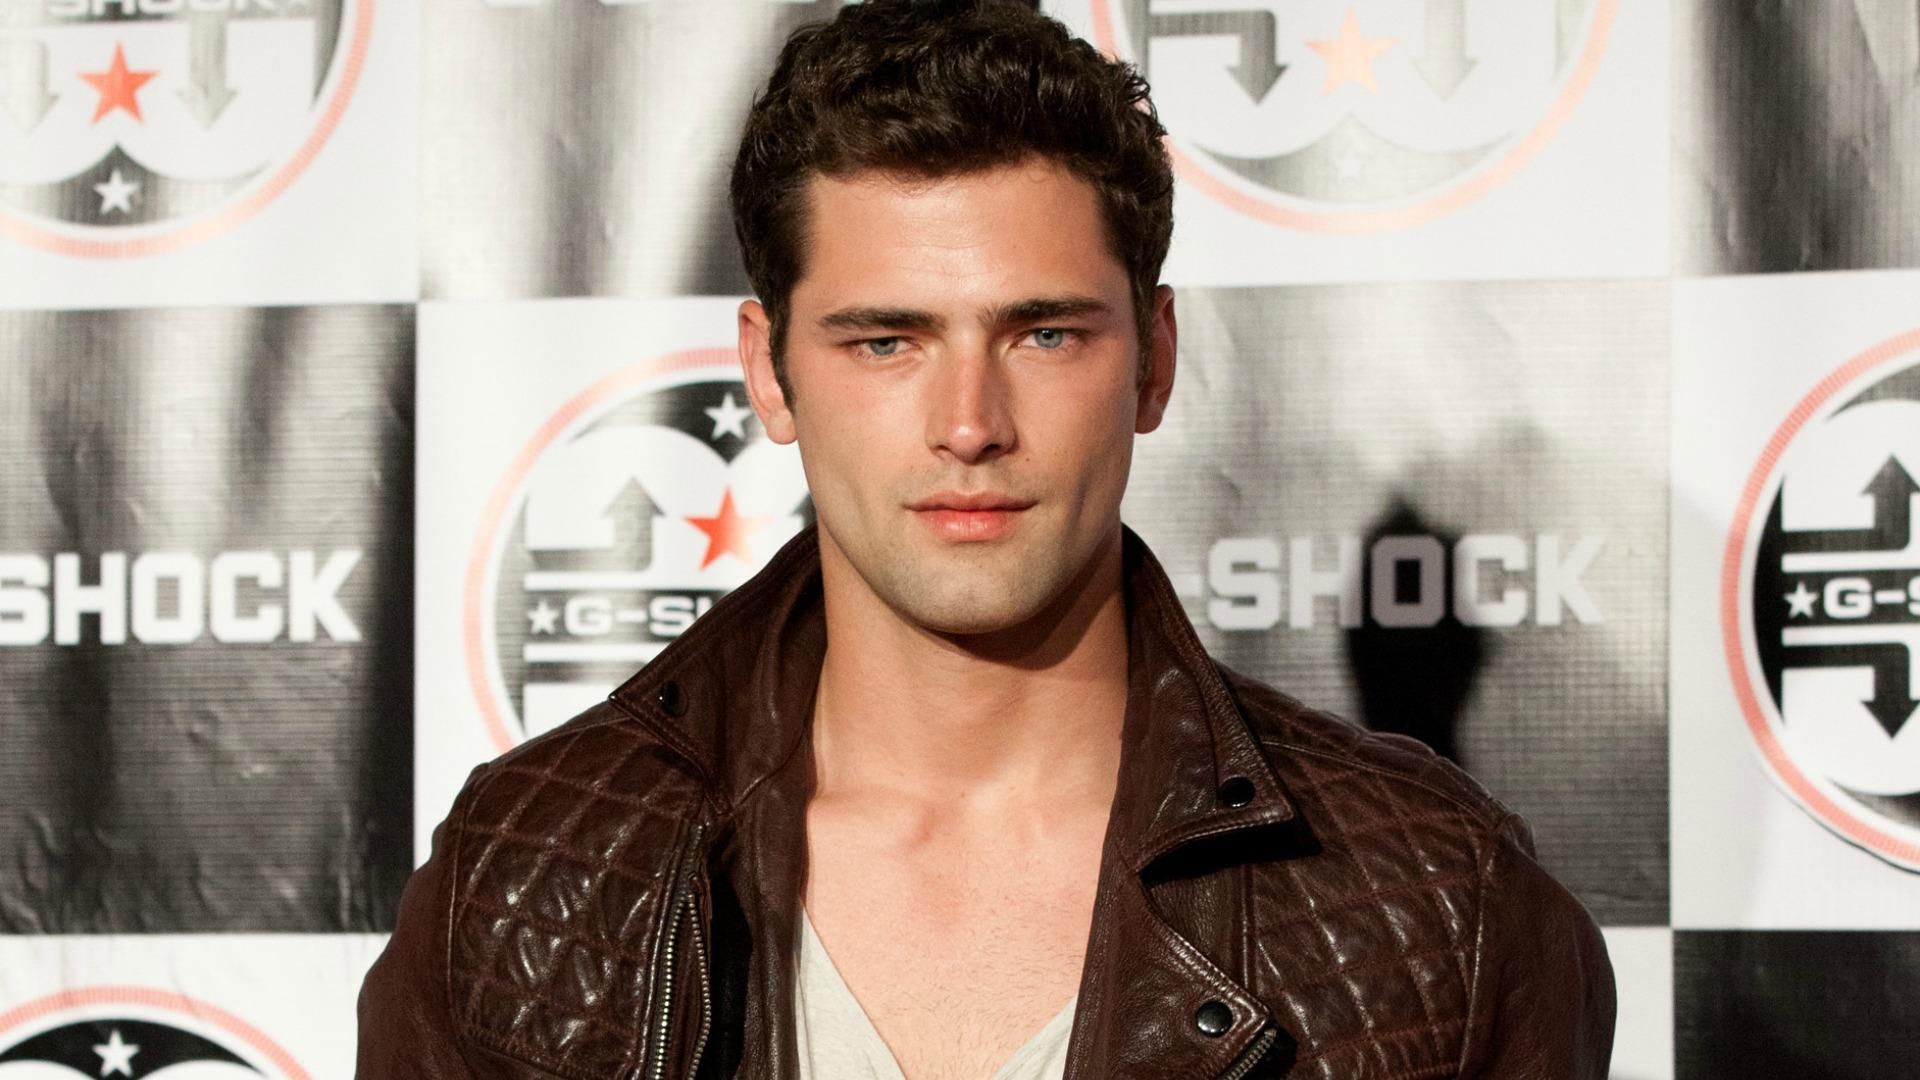 GIFs of the hot guy Sean O'Pry in Taylor Swift's 'Blank Space